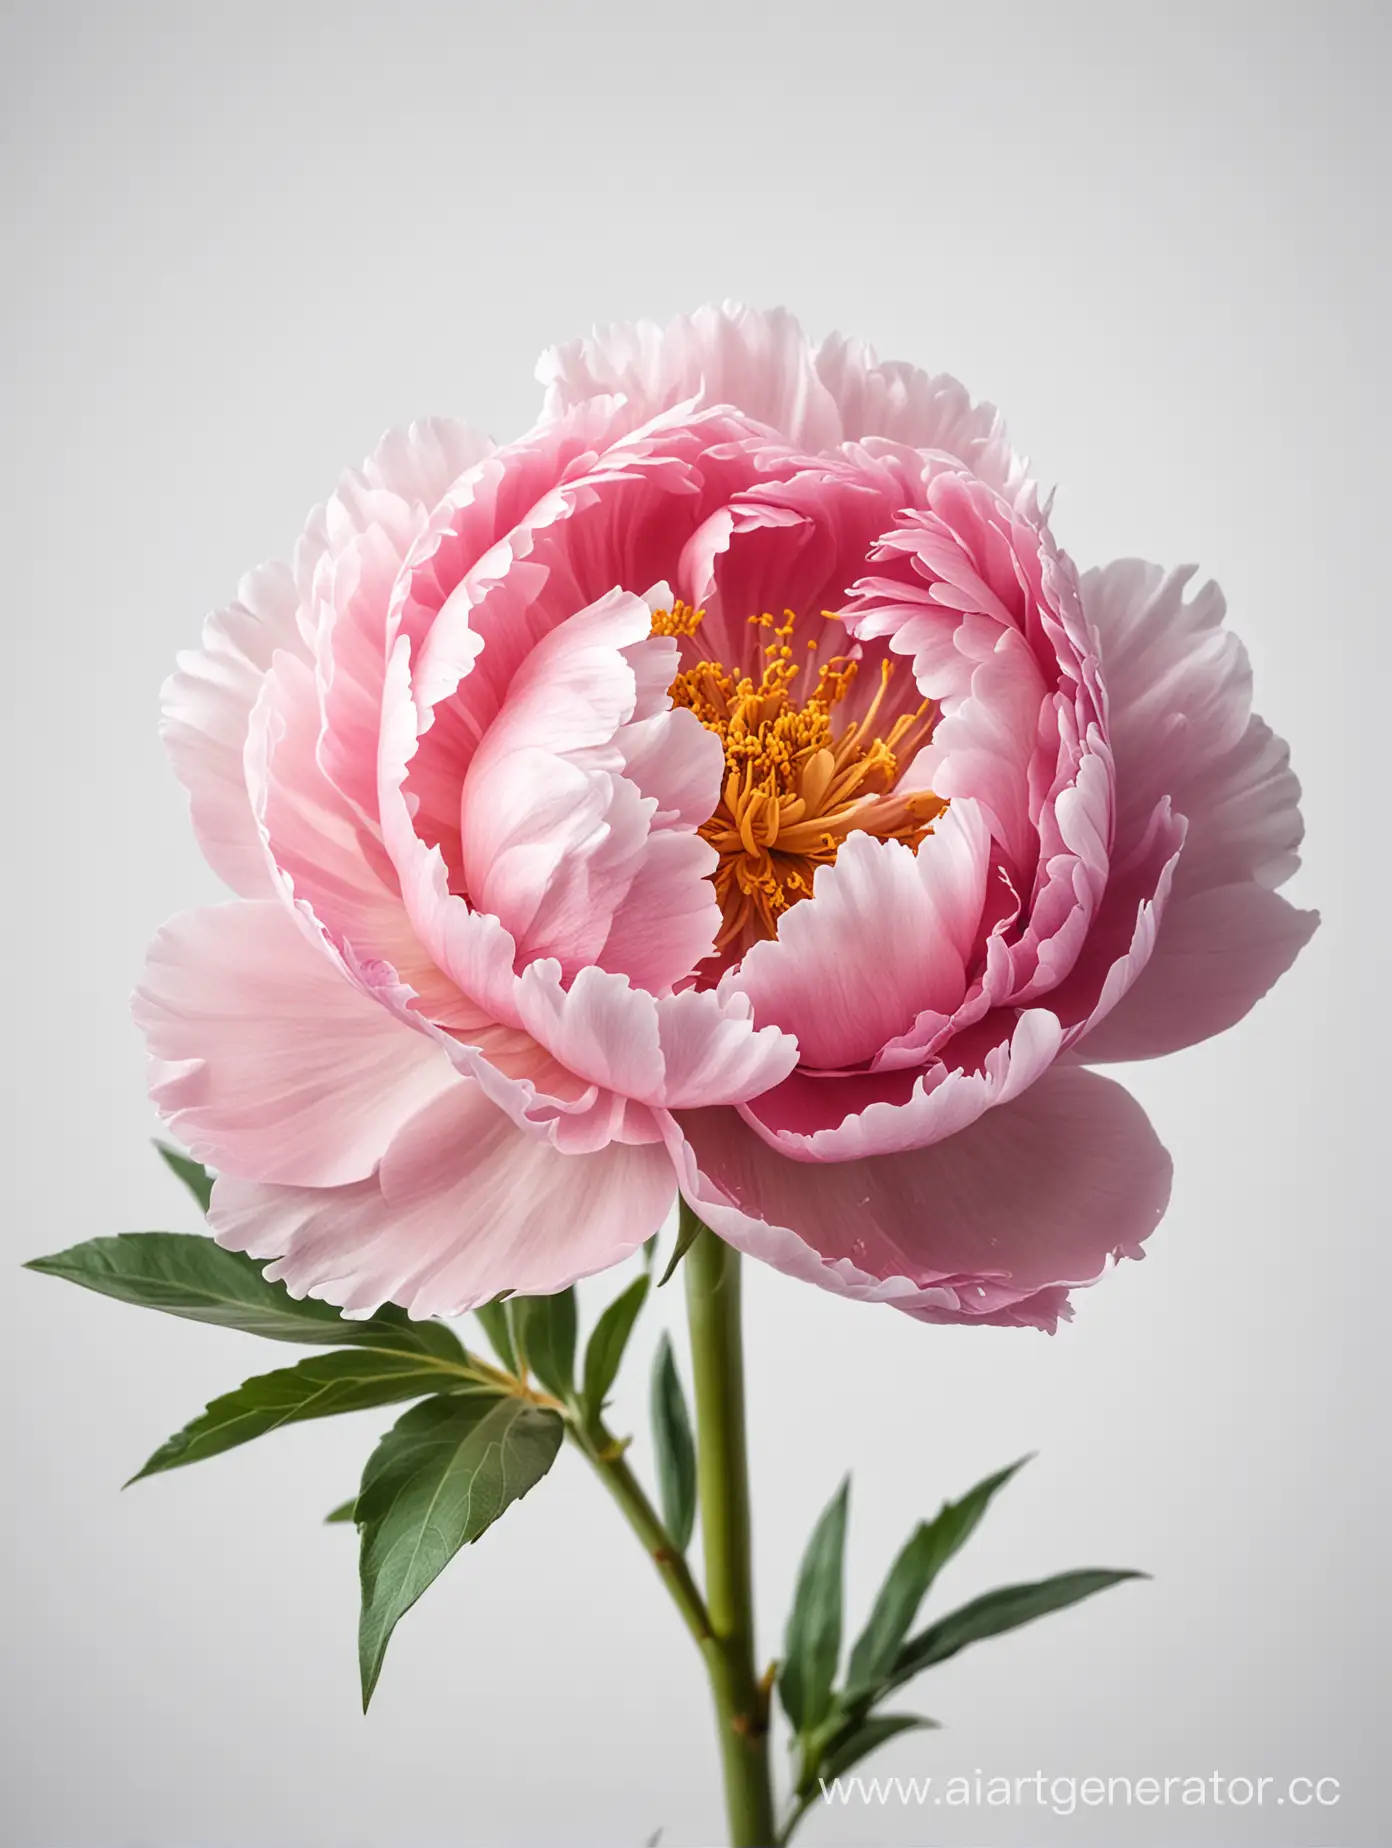 Single-Peony-Flower-Blossoming-on-Clean-White-Background